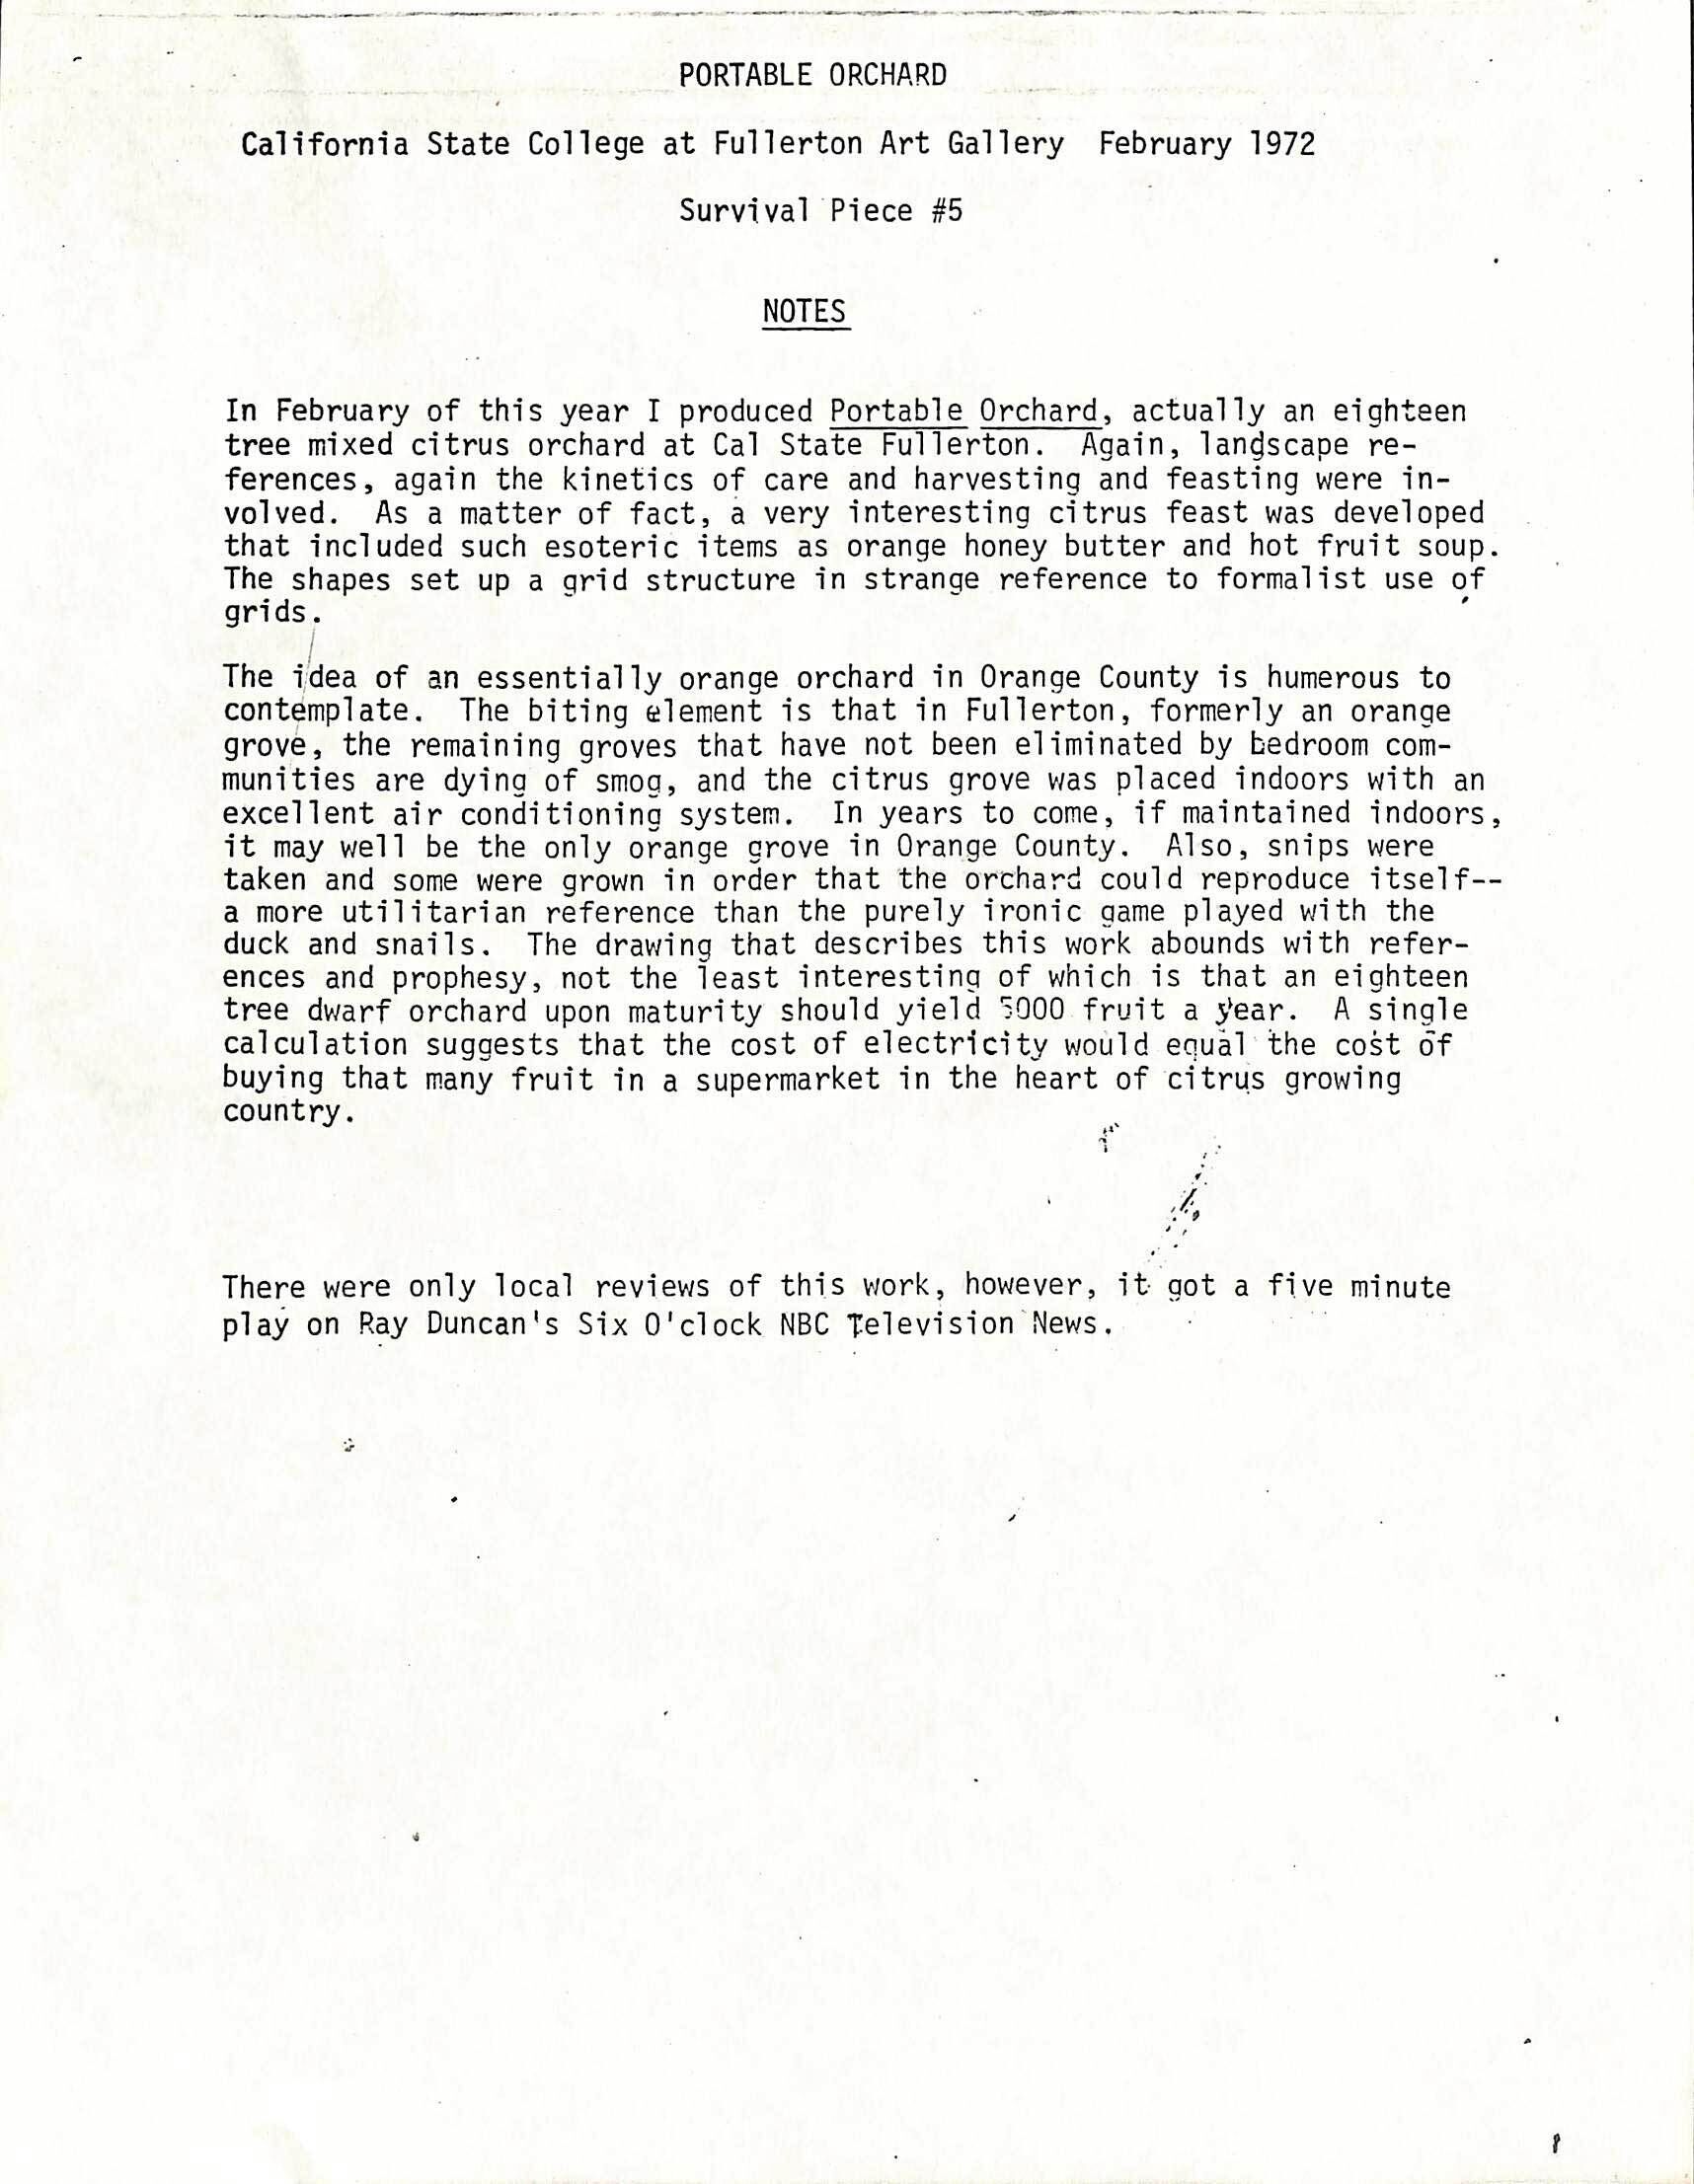 Typed notes titled "Portable Orchard" from California State College at Fullerton Art Gallery, February 1972, discussing an 18-tree citrus orchard installation.